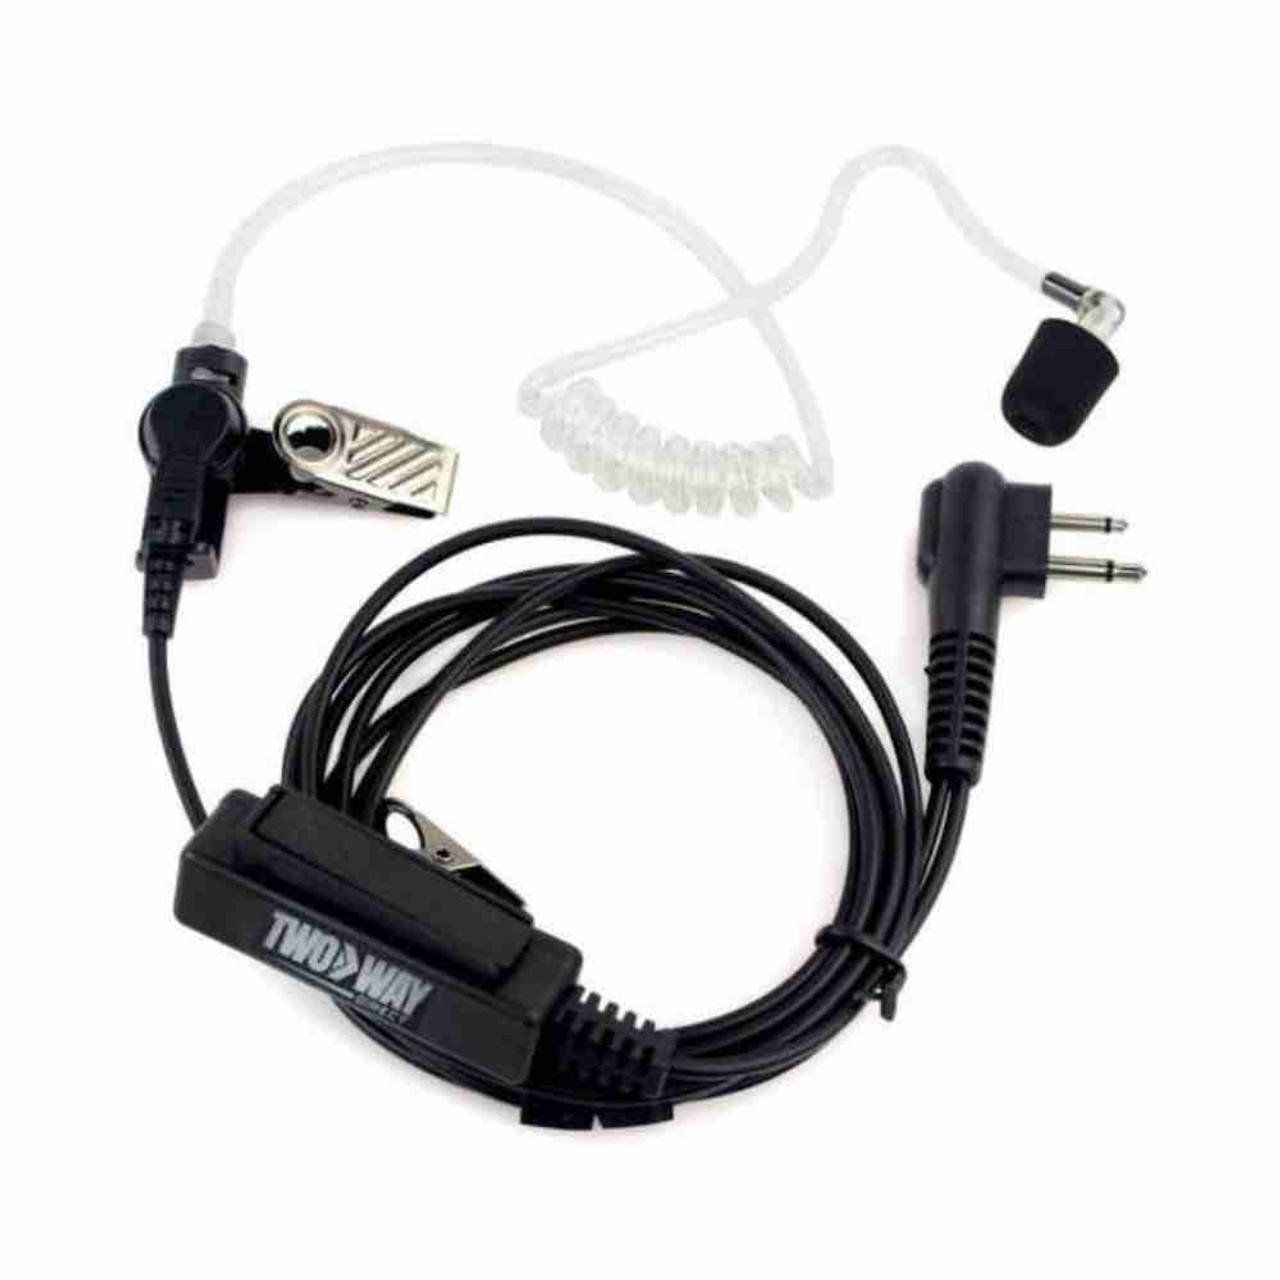 Two Way Direct 2-Wire Surveillance Kit Earpiece For Motorola Two-Way Radios